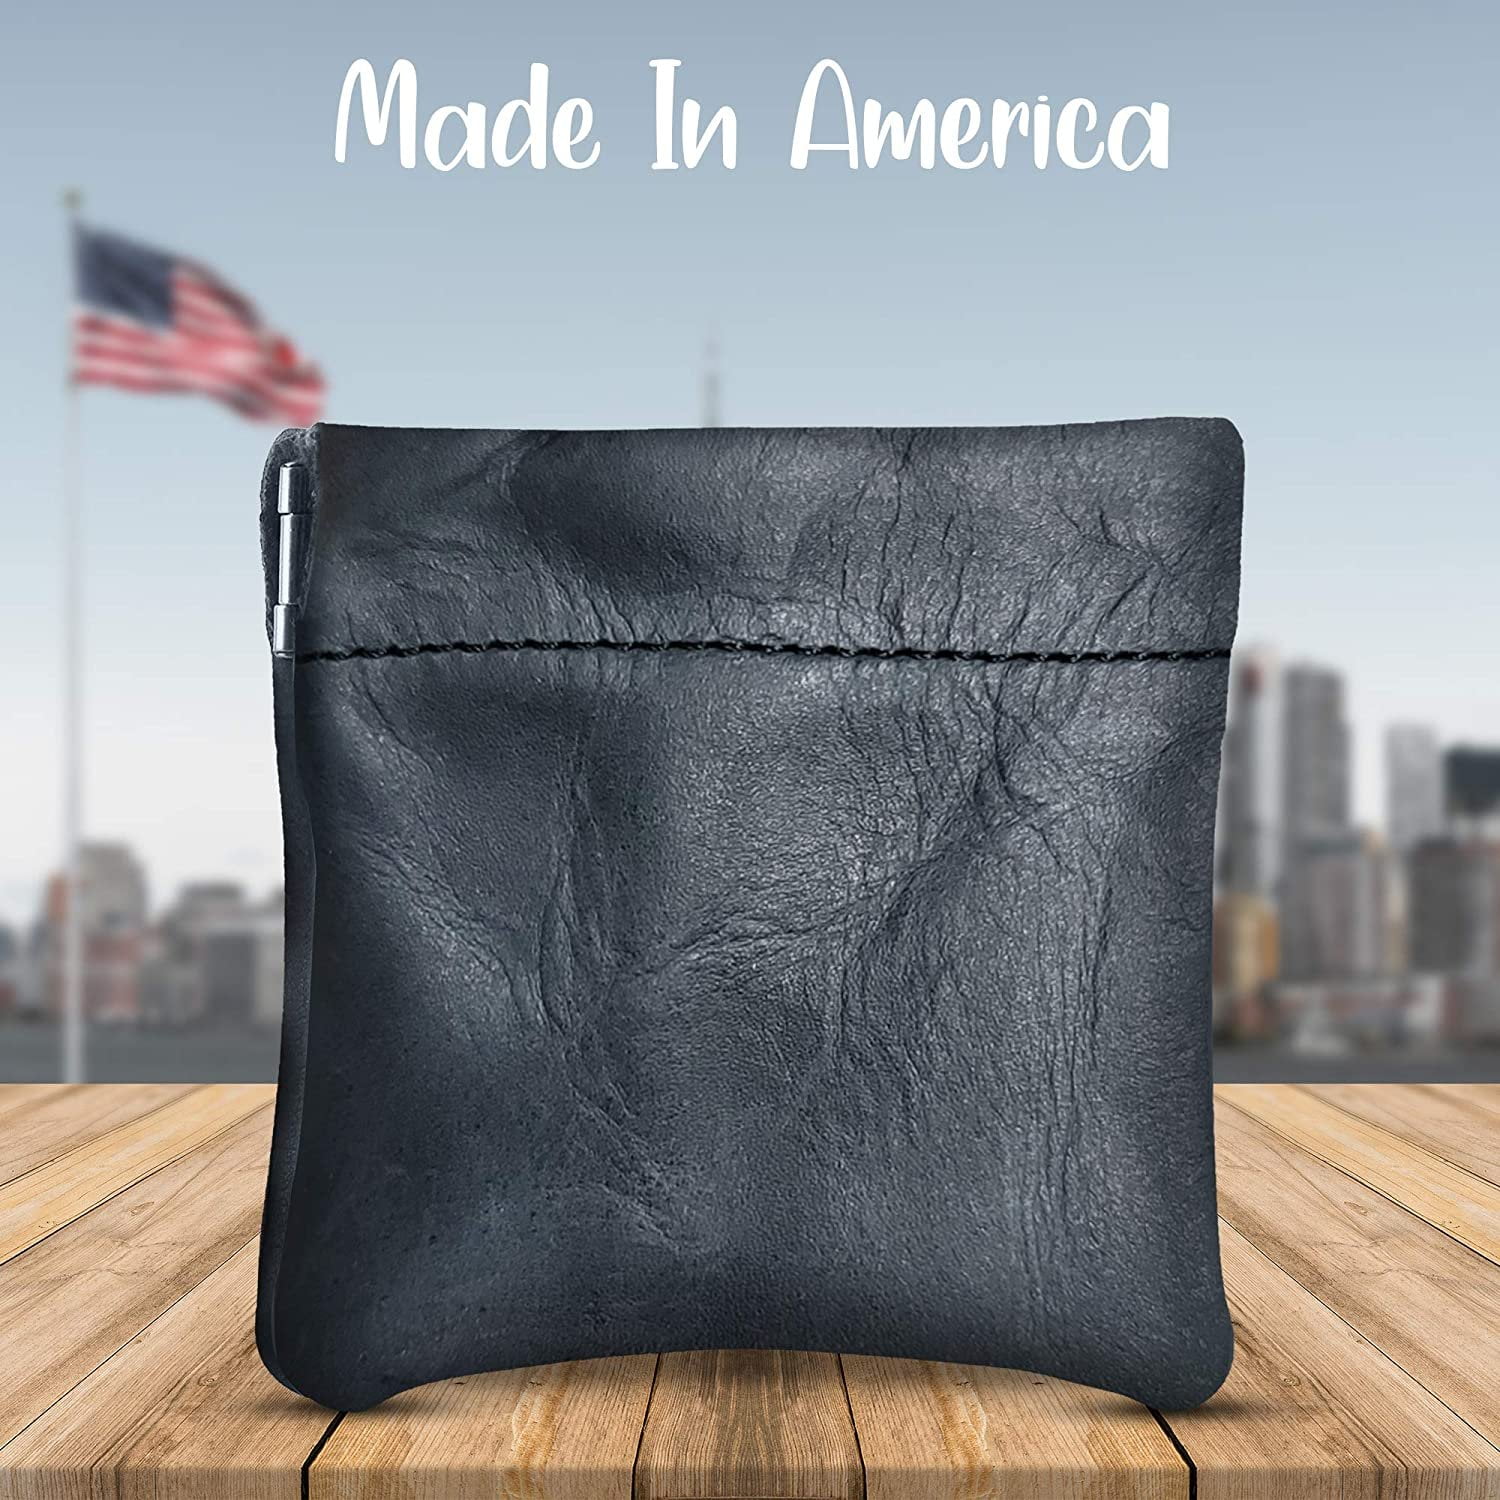 Limited Edition Leather Zip Wristlet Pouch, Wallet, American Flag